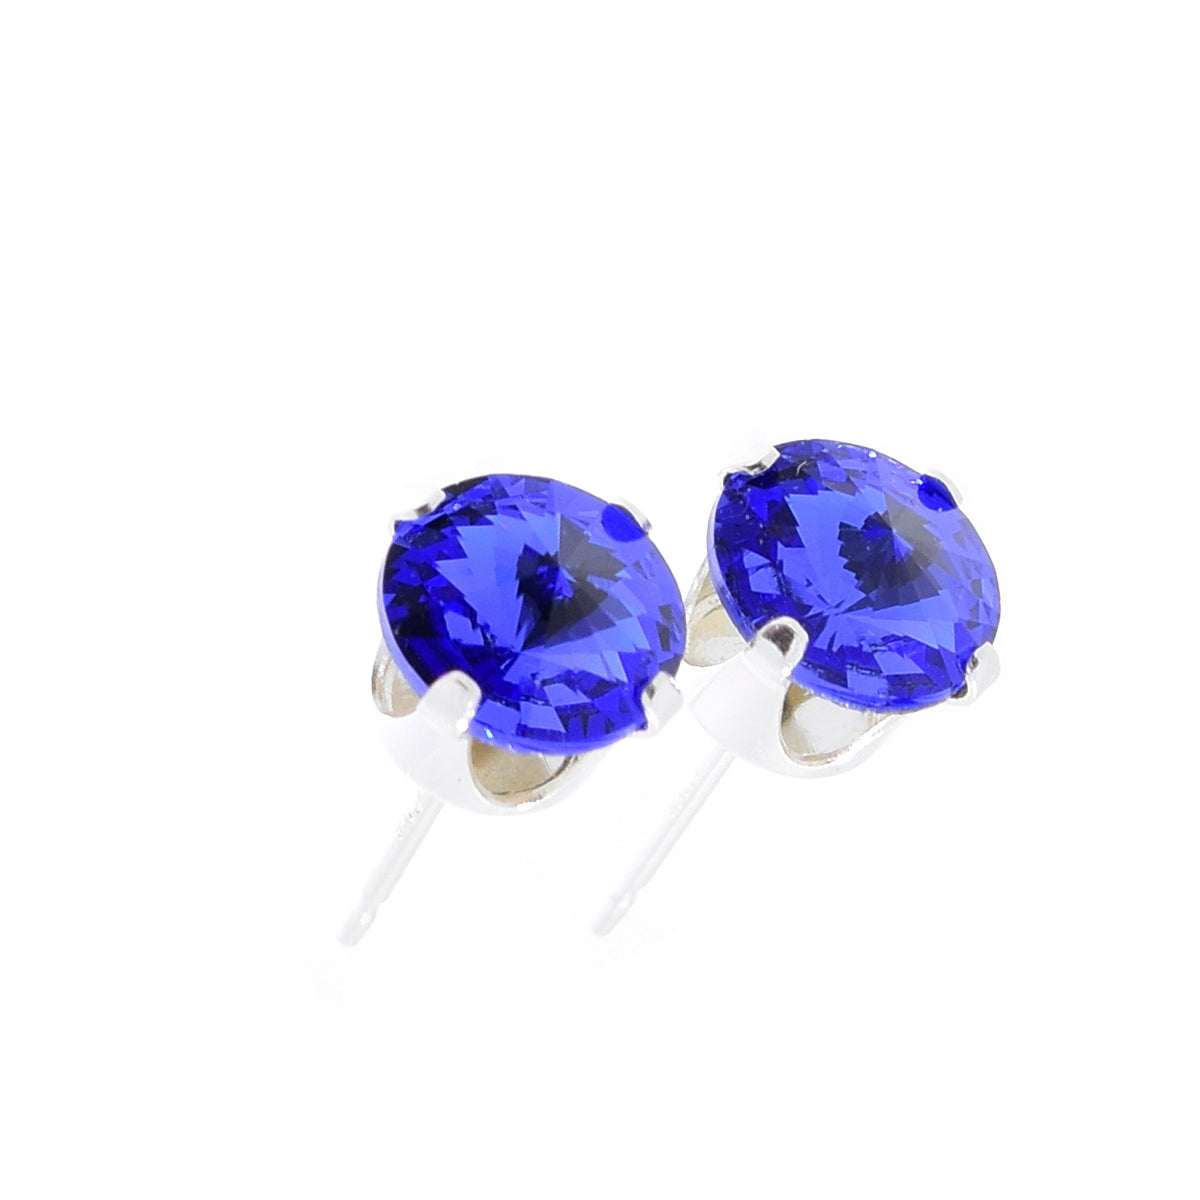 pewterhooter® Women's Classic Collection 925 Sterling silver earrings with brilliant Sapphire Blue crystals, packaged in a gift box for any occasion.